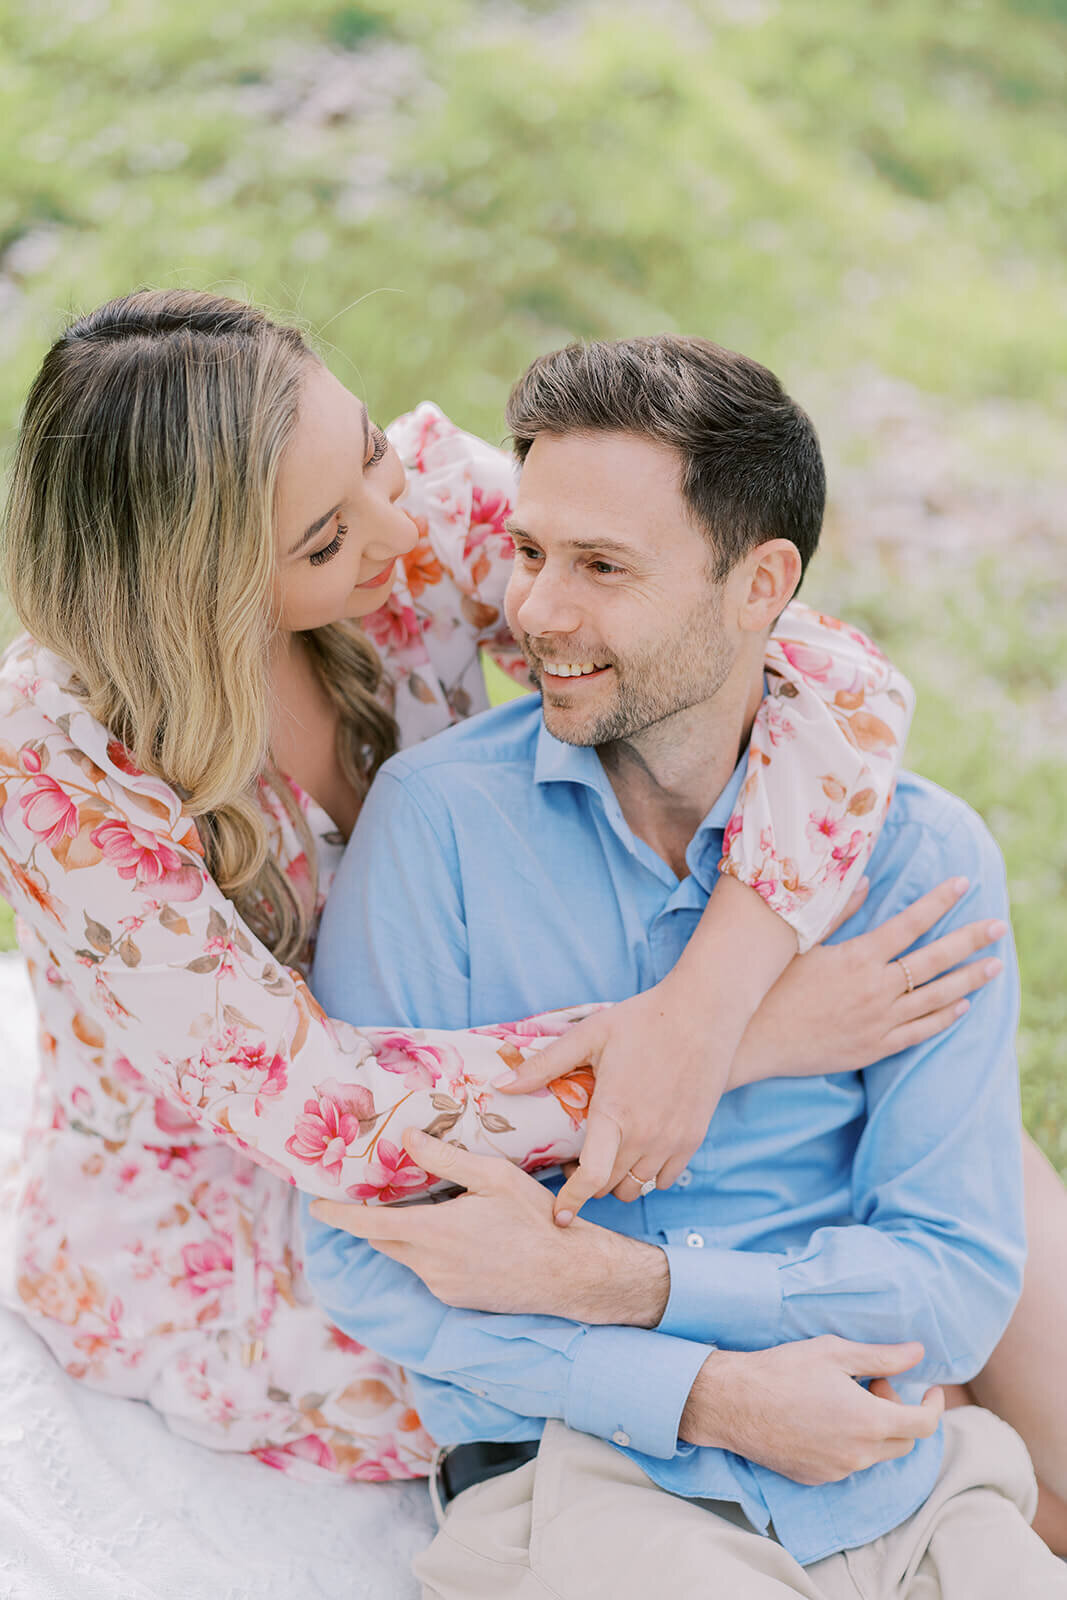 Immerse in romance with our Adelaide almond blossom couple's photoshoot, capturing love amid nature's beauty.